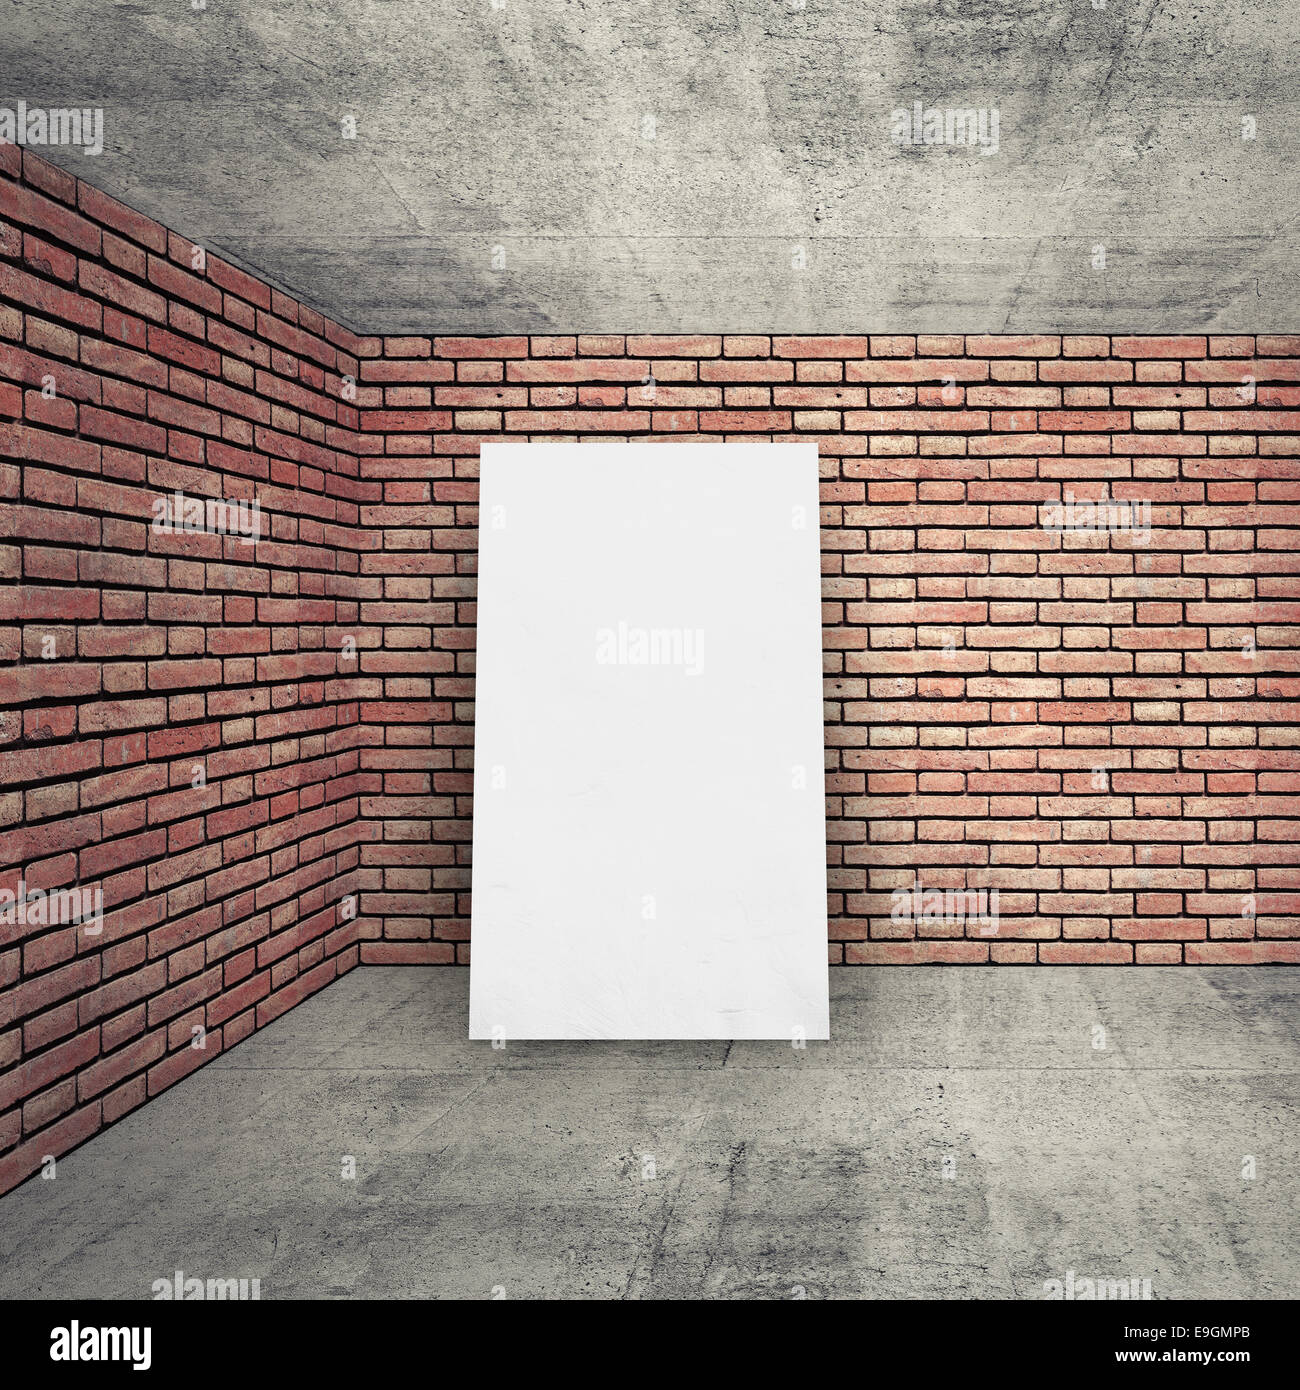 Empty white room interior with white banner, brick walls and concrete floor. Square 3d background Stock Photo